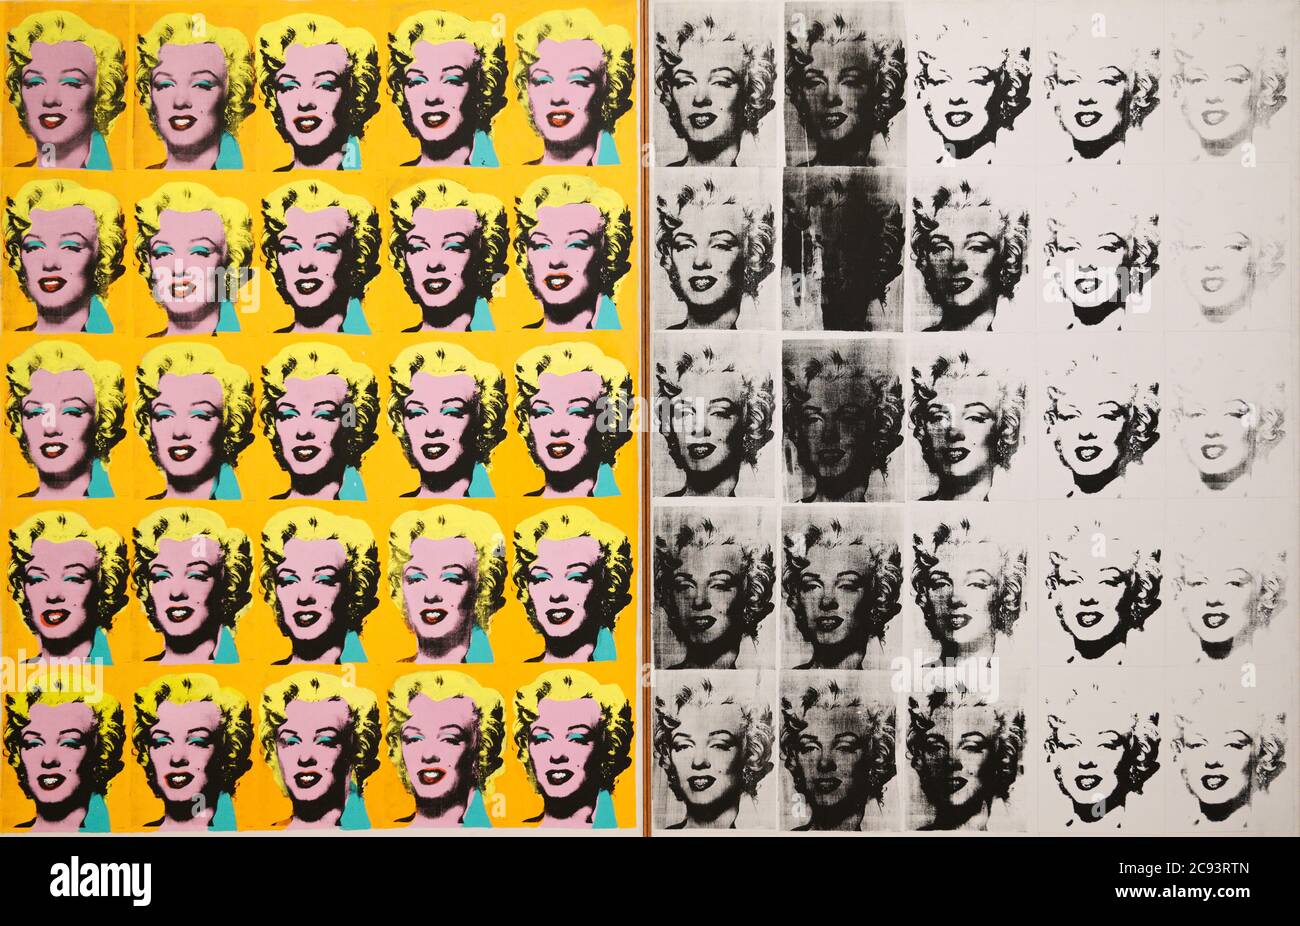 Marilyn Diptych, Andy Warhol, 1962 Stock Photo